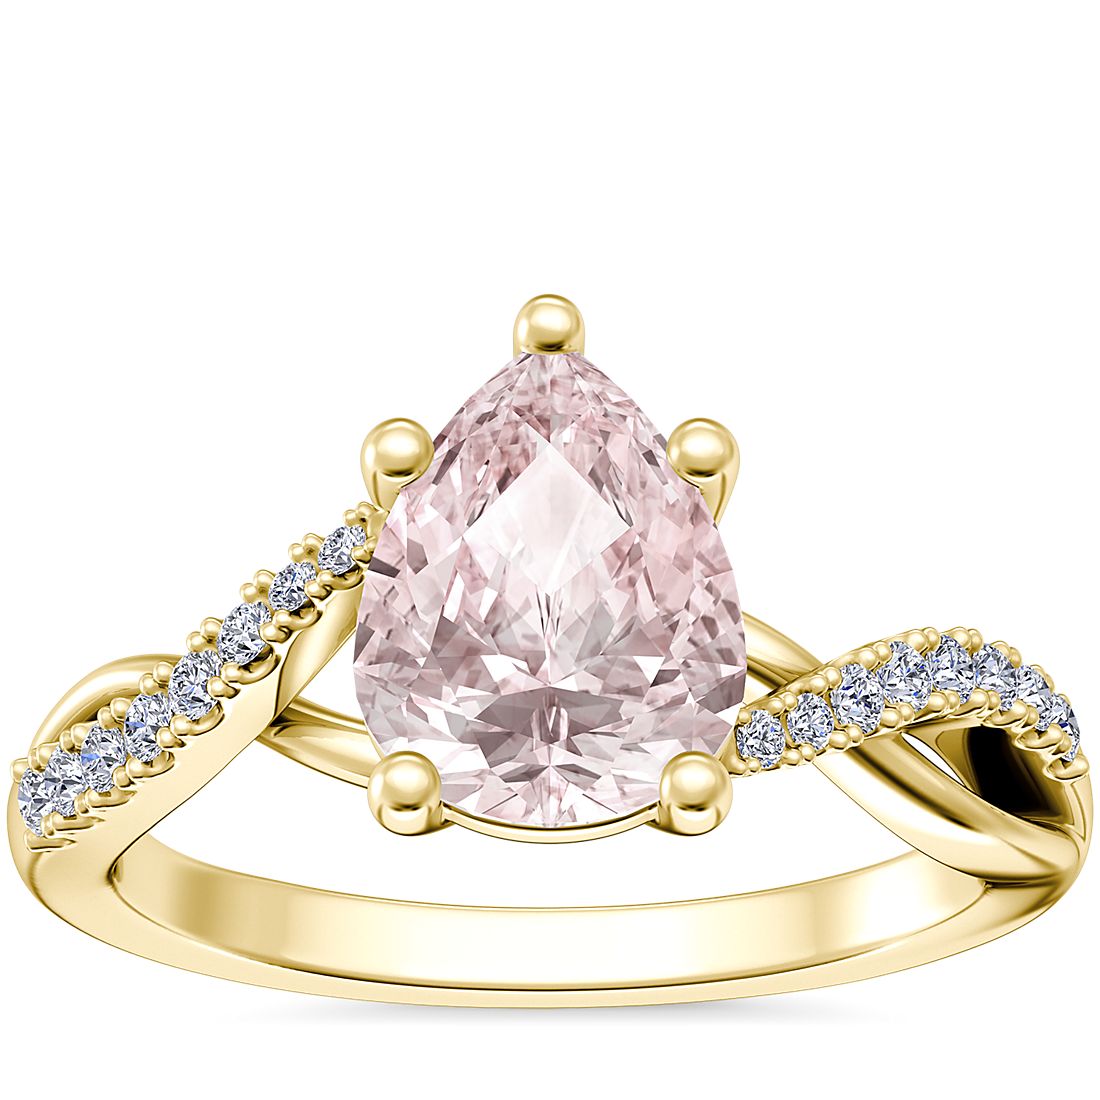 Classic Petite Twist Diamond Engagement Ring with Pear-Shaped Morganite in 14k Yellow Gold (8x6mm)